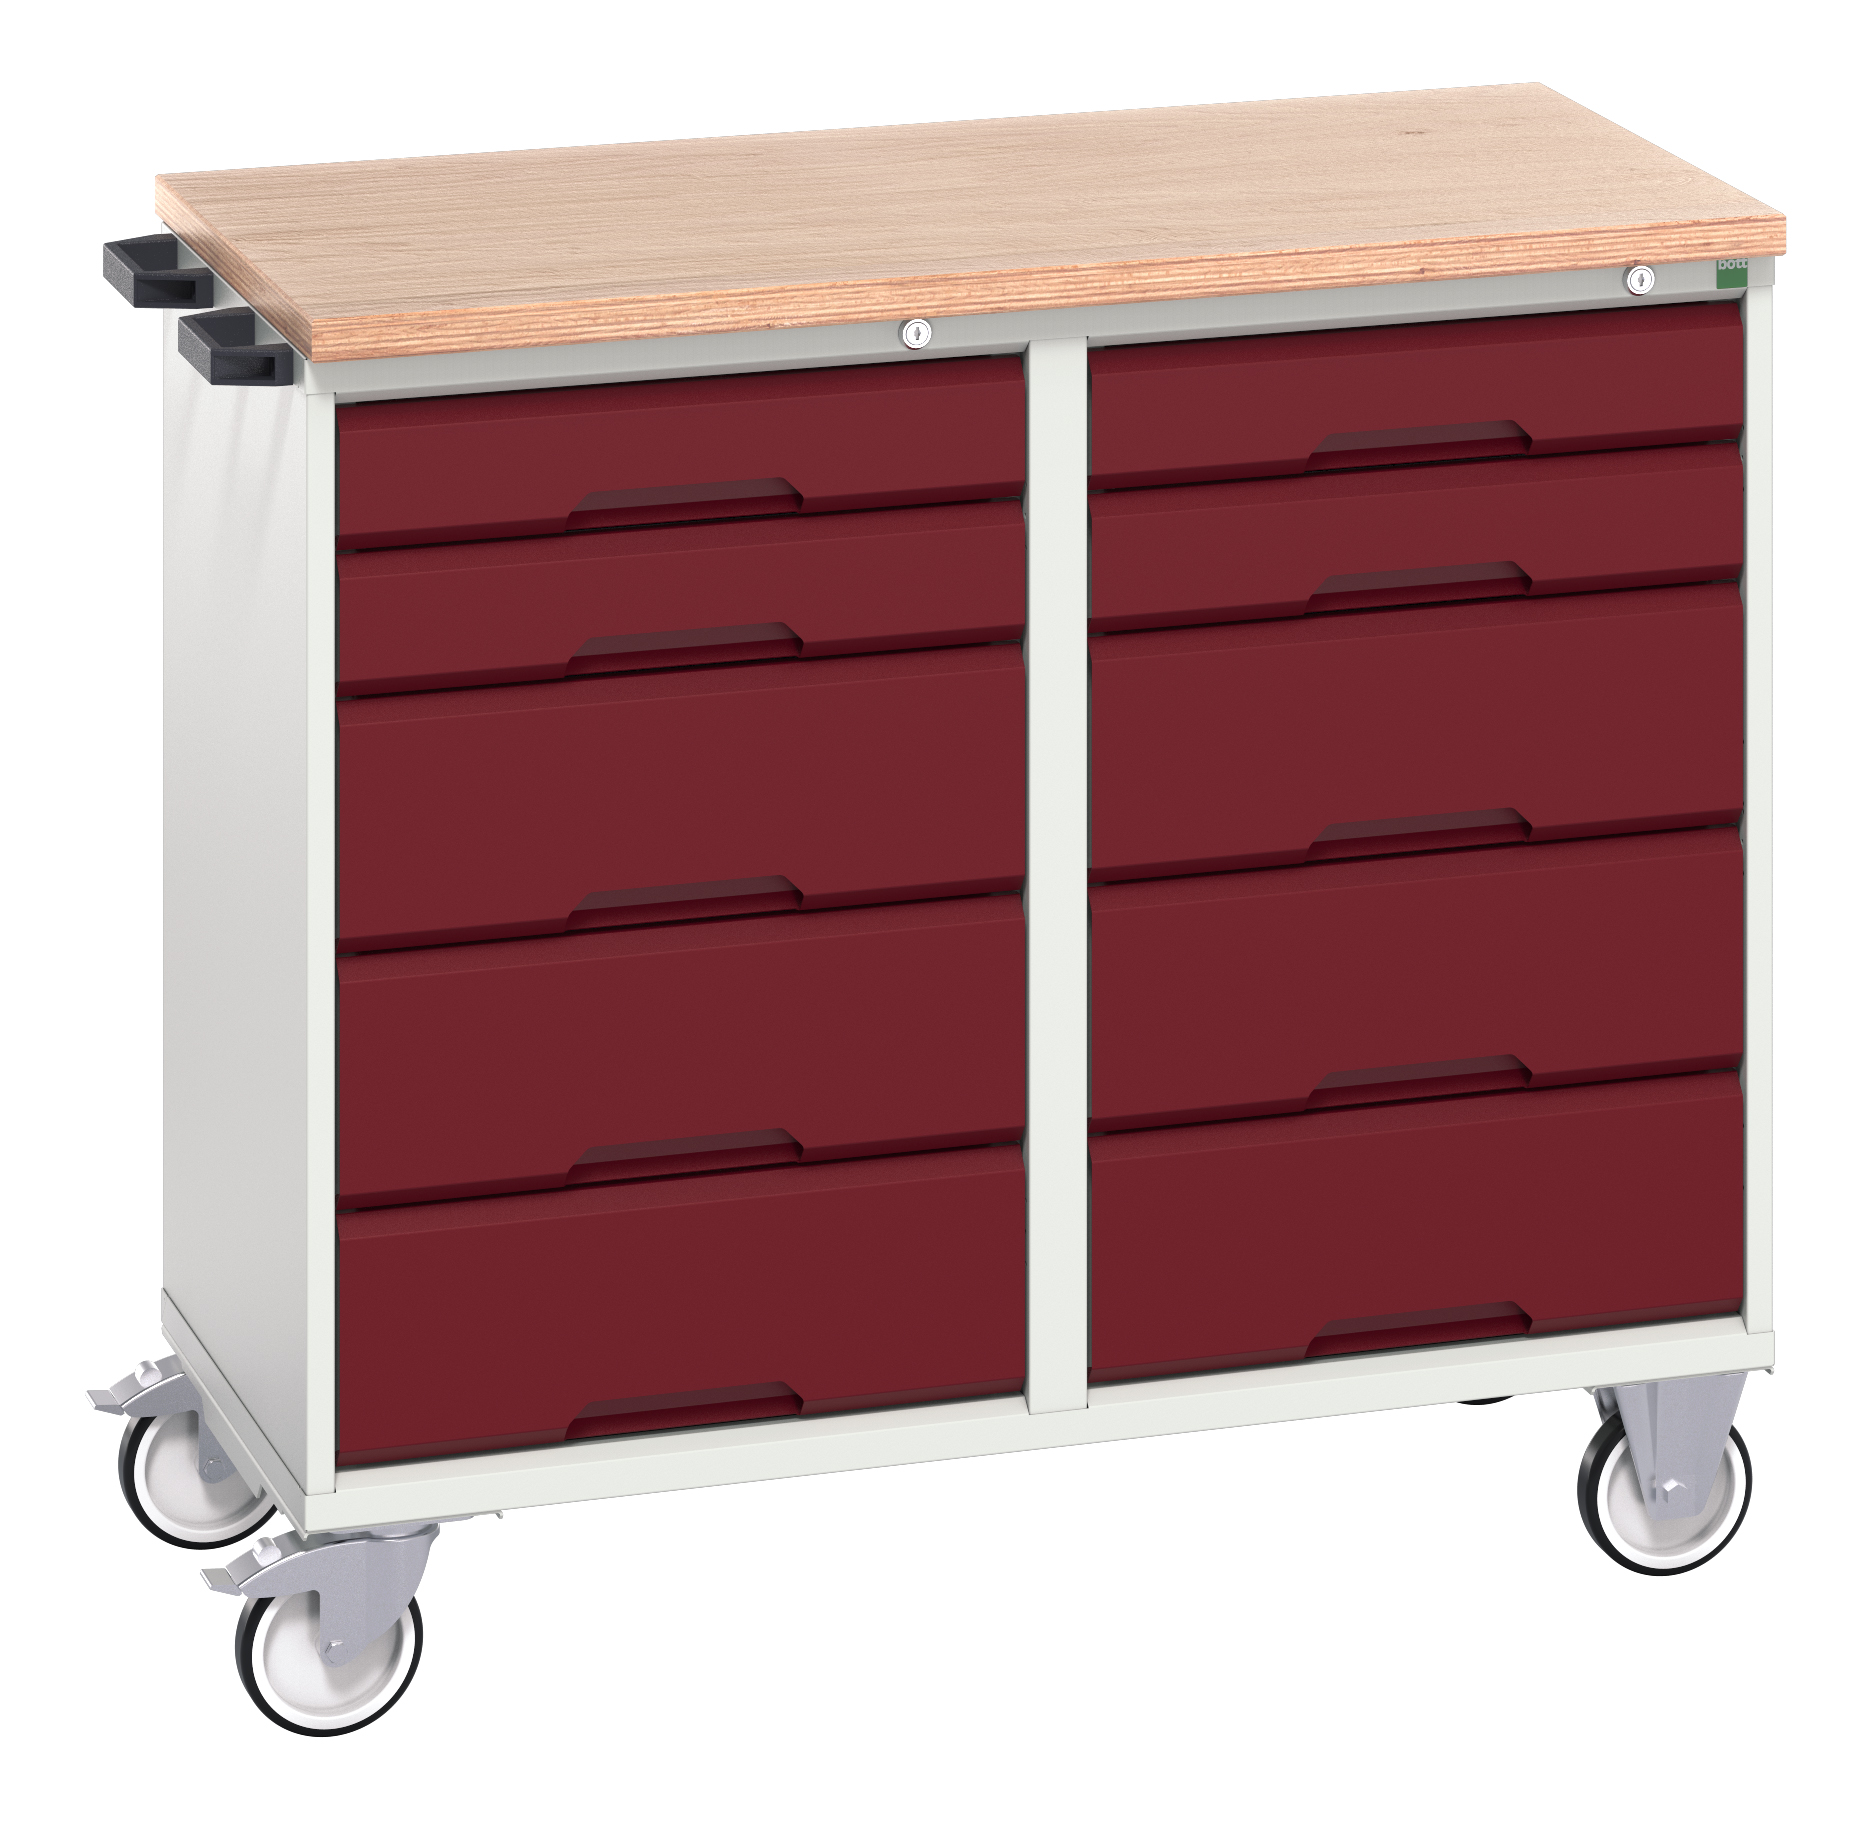 Bott Verso Maintenance Trolley With 10 Drawers & Multiplex Top - 16927101.24